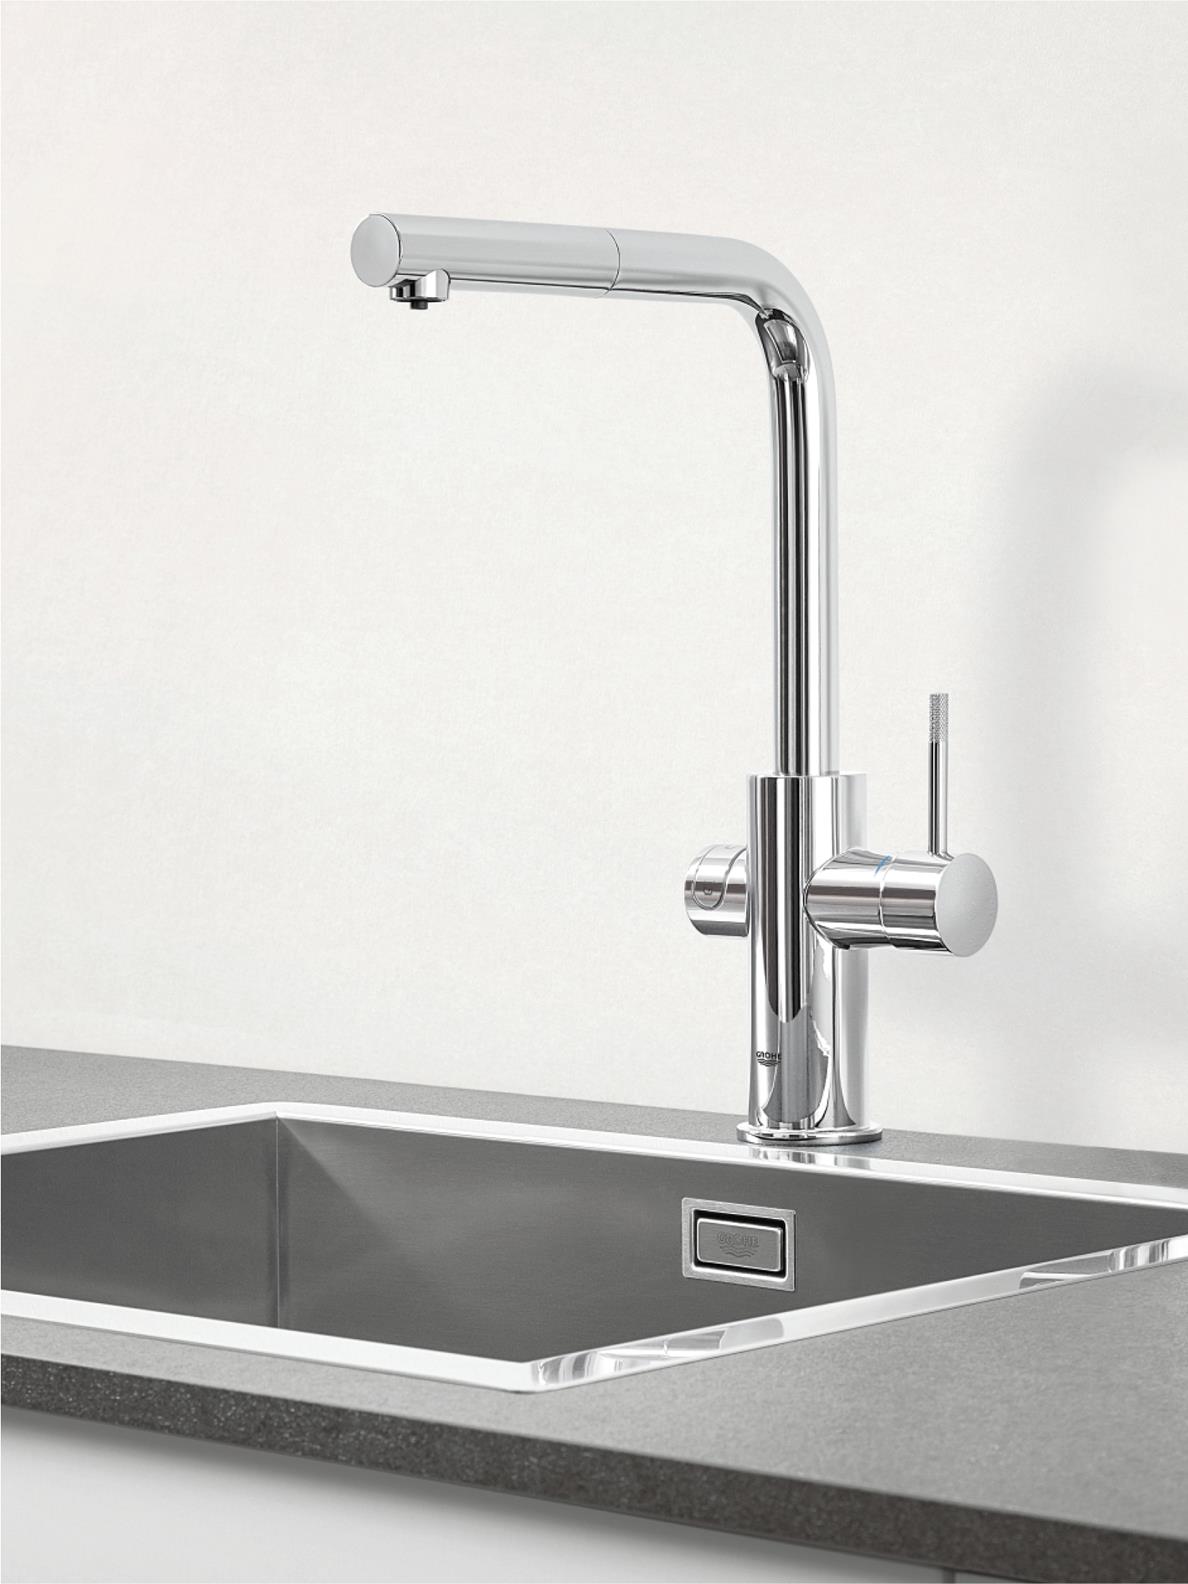 GROHE Blue Professional - GROHE Watersystem